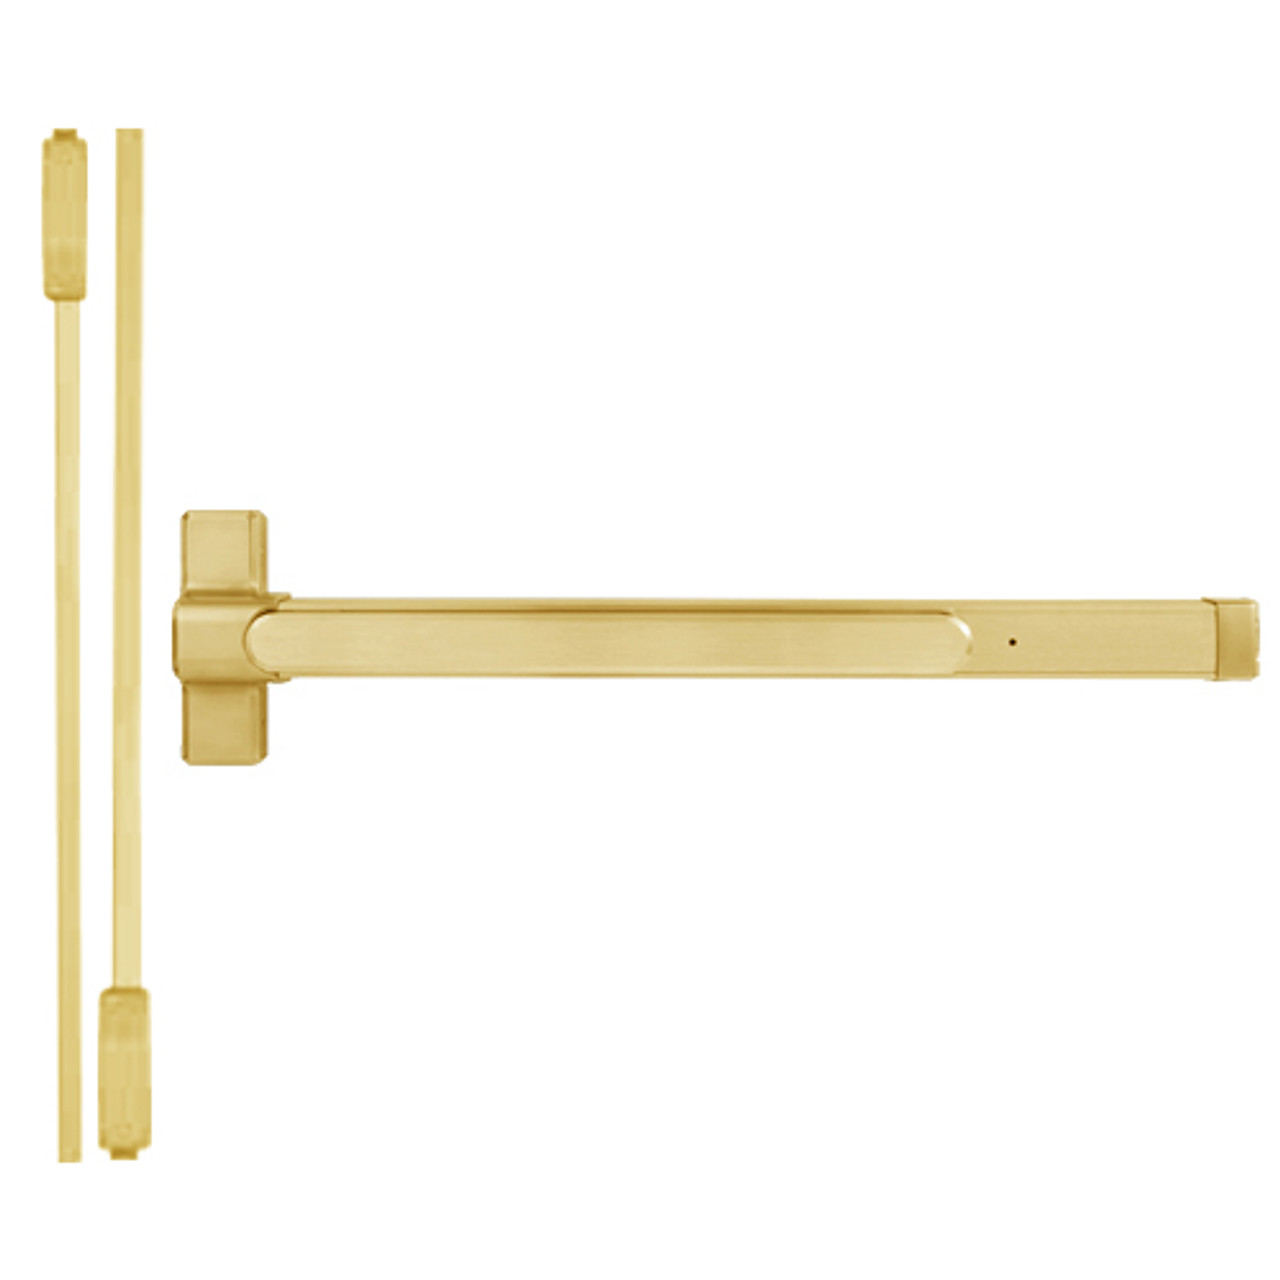 QED116X-36-8-605 Stanley QED100 Series Heavy Duty Surface Vertical Rod Fire Rated Exit Device in Bright Brass Finish